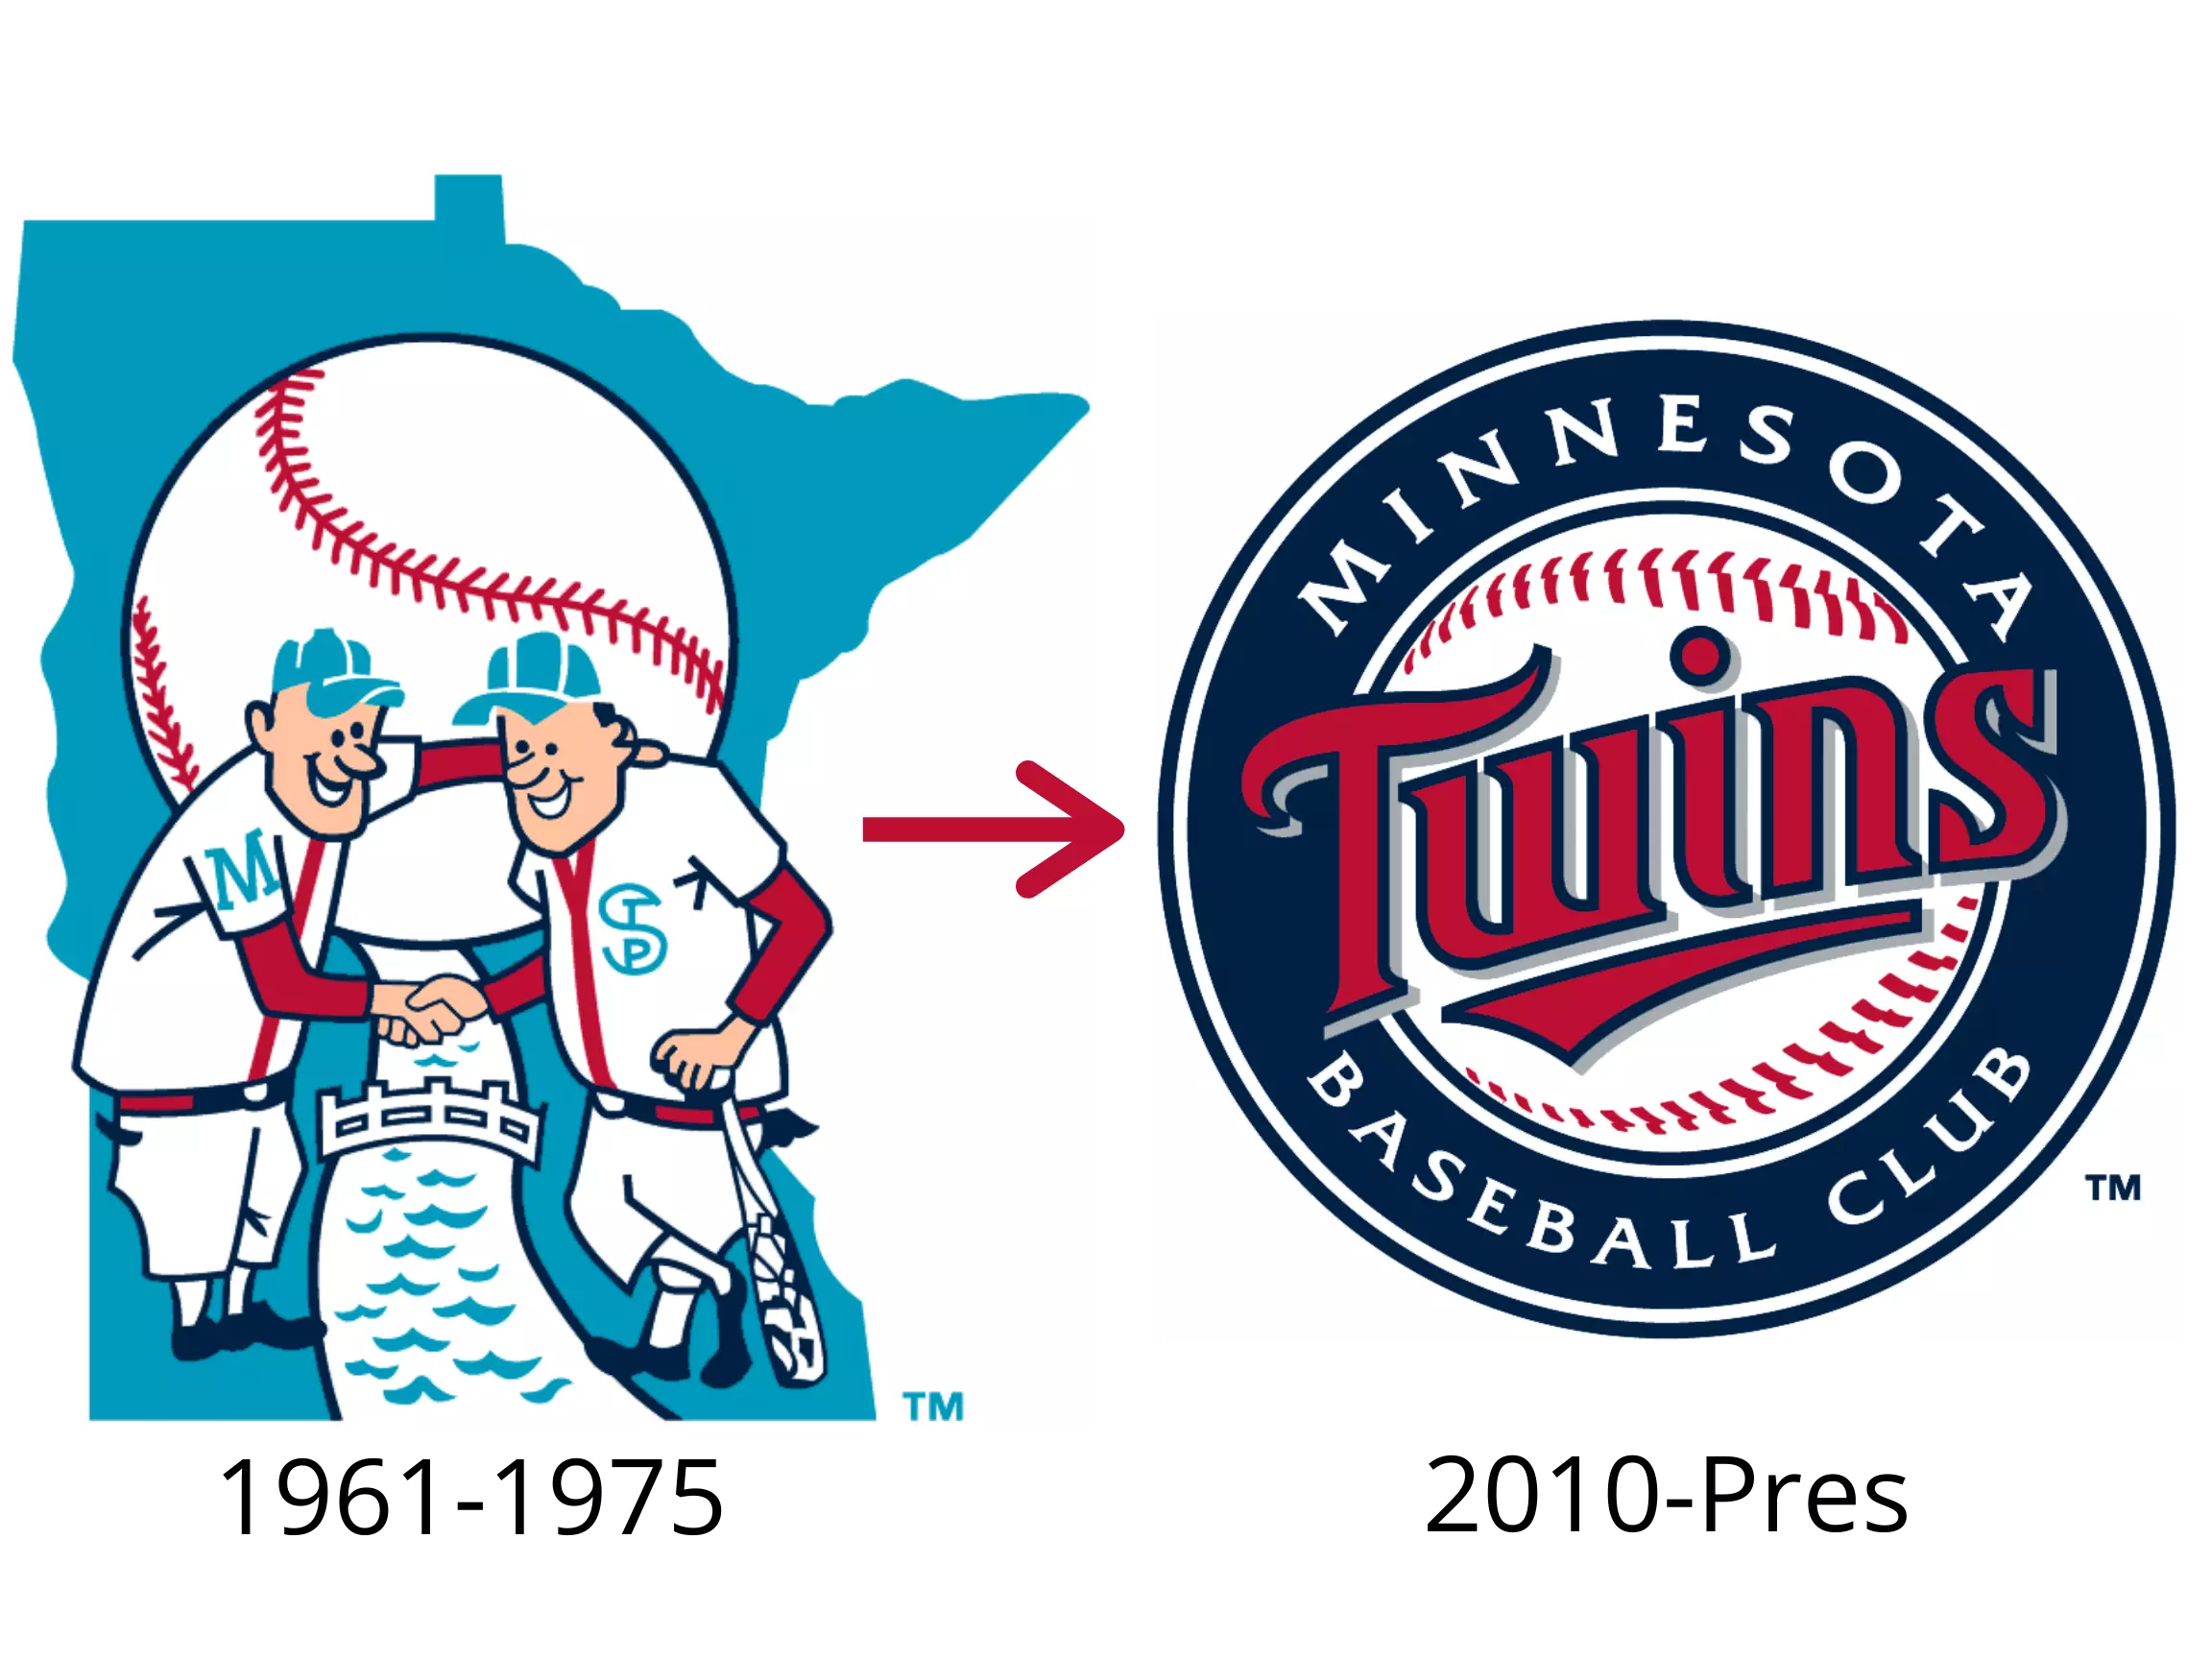 Check Out The Evolution of Minnesota's Pro Sports Team's Logos!